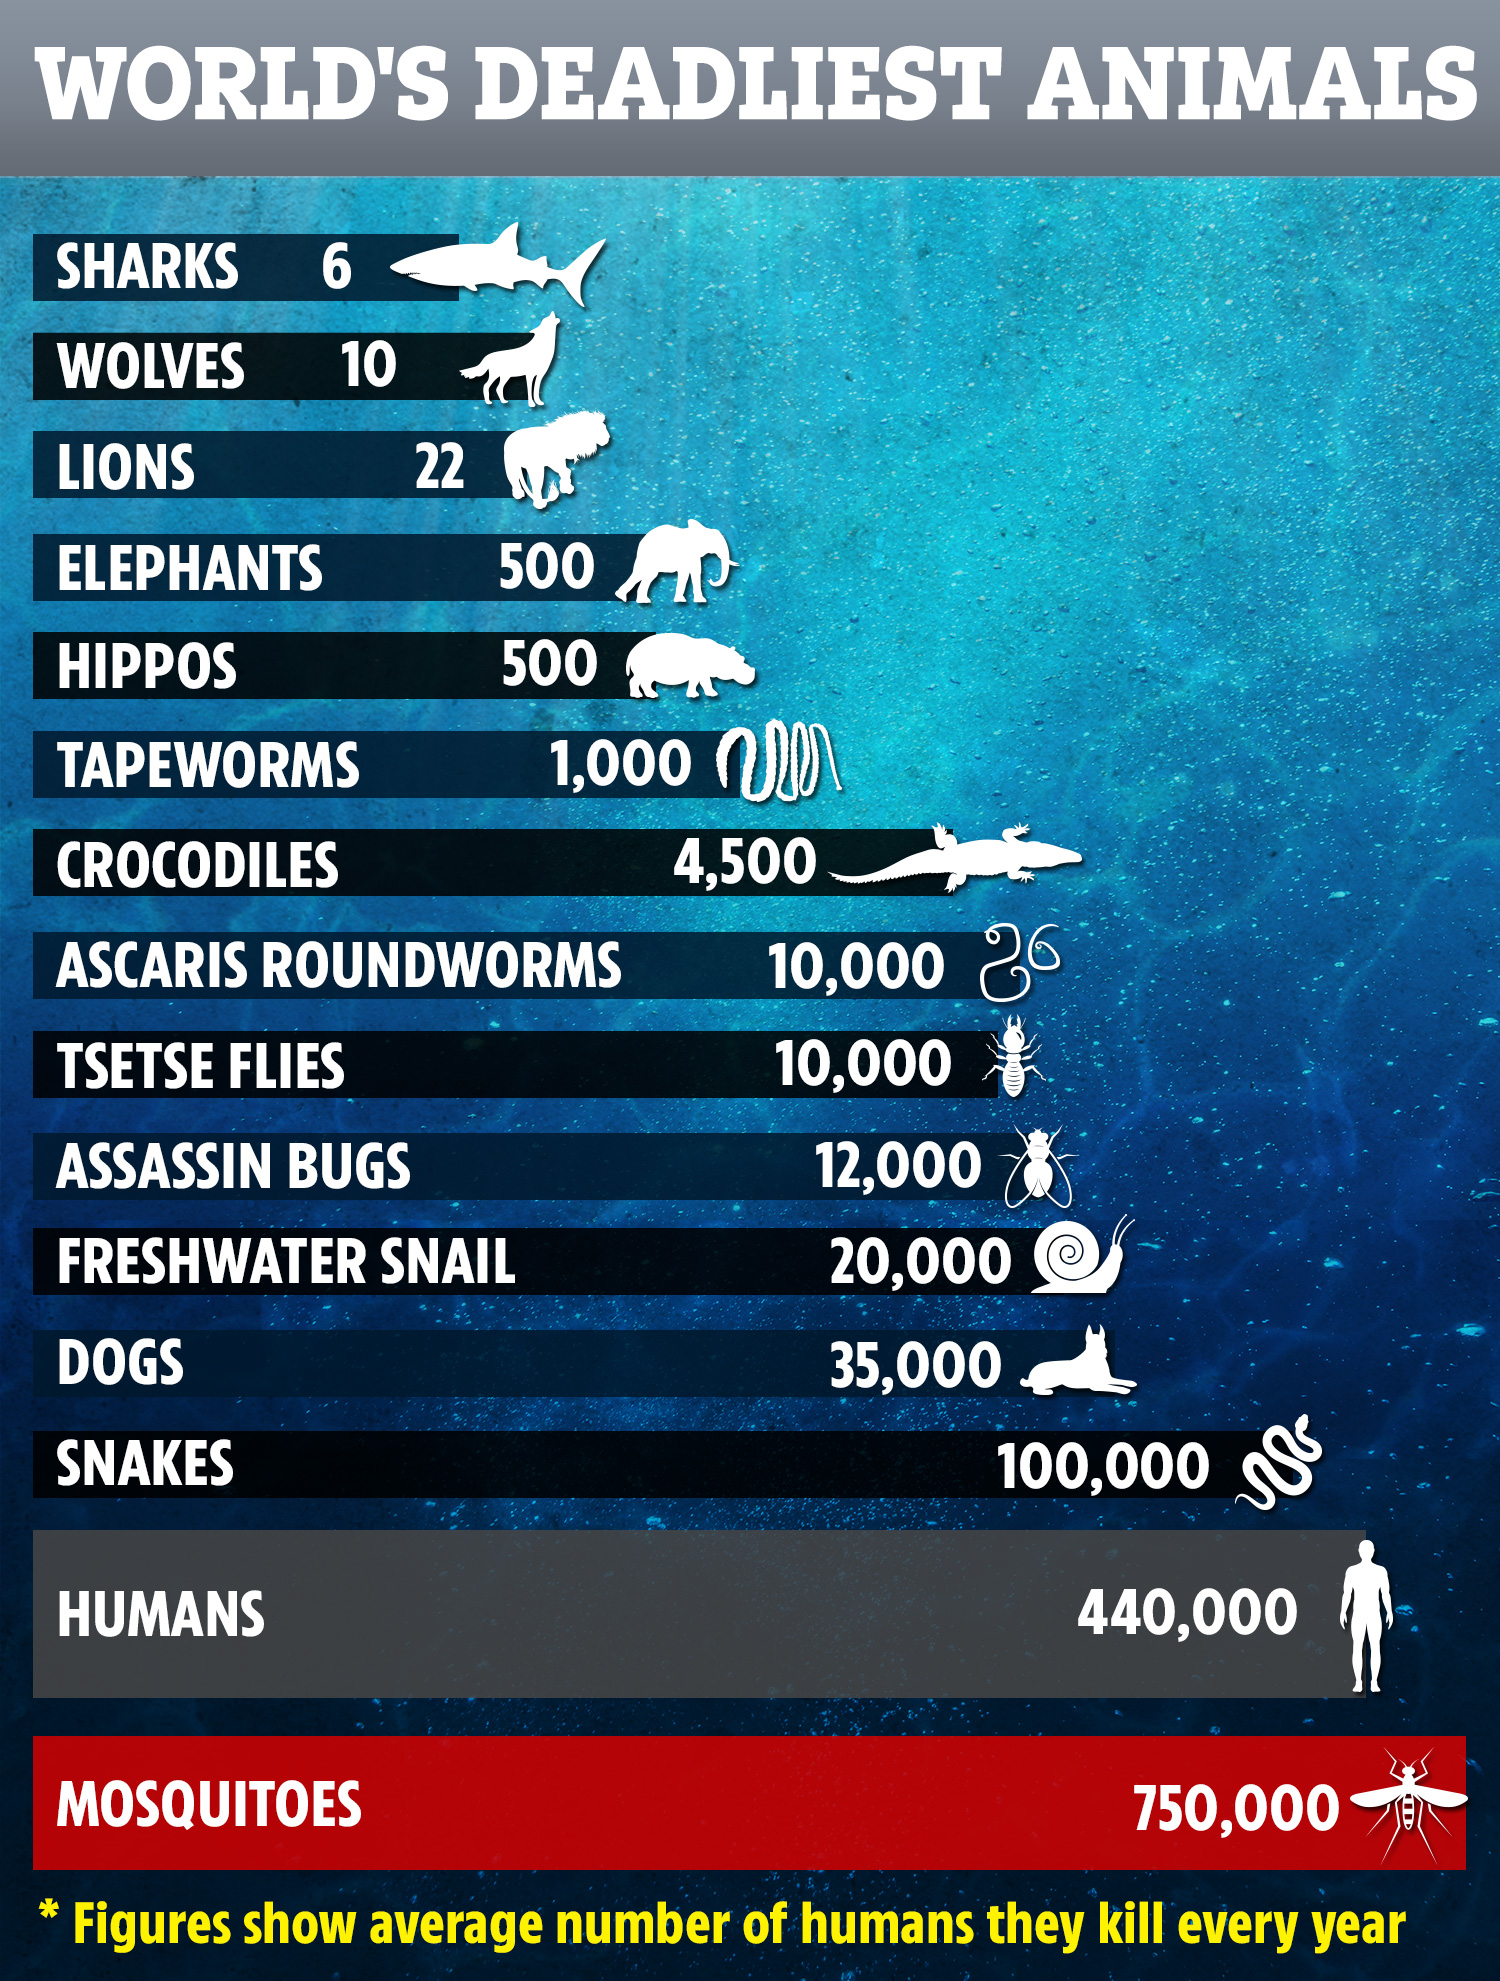 What animal killed the most humans in 2020?